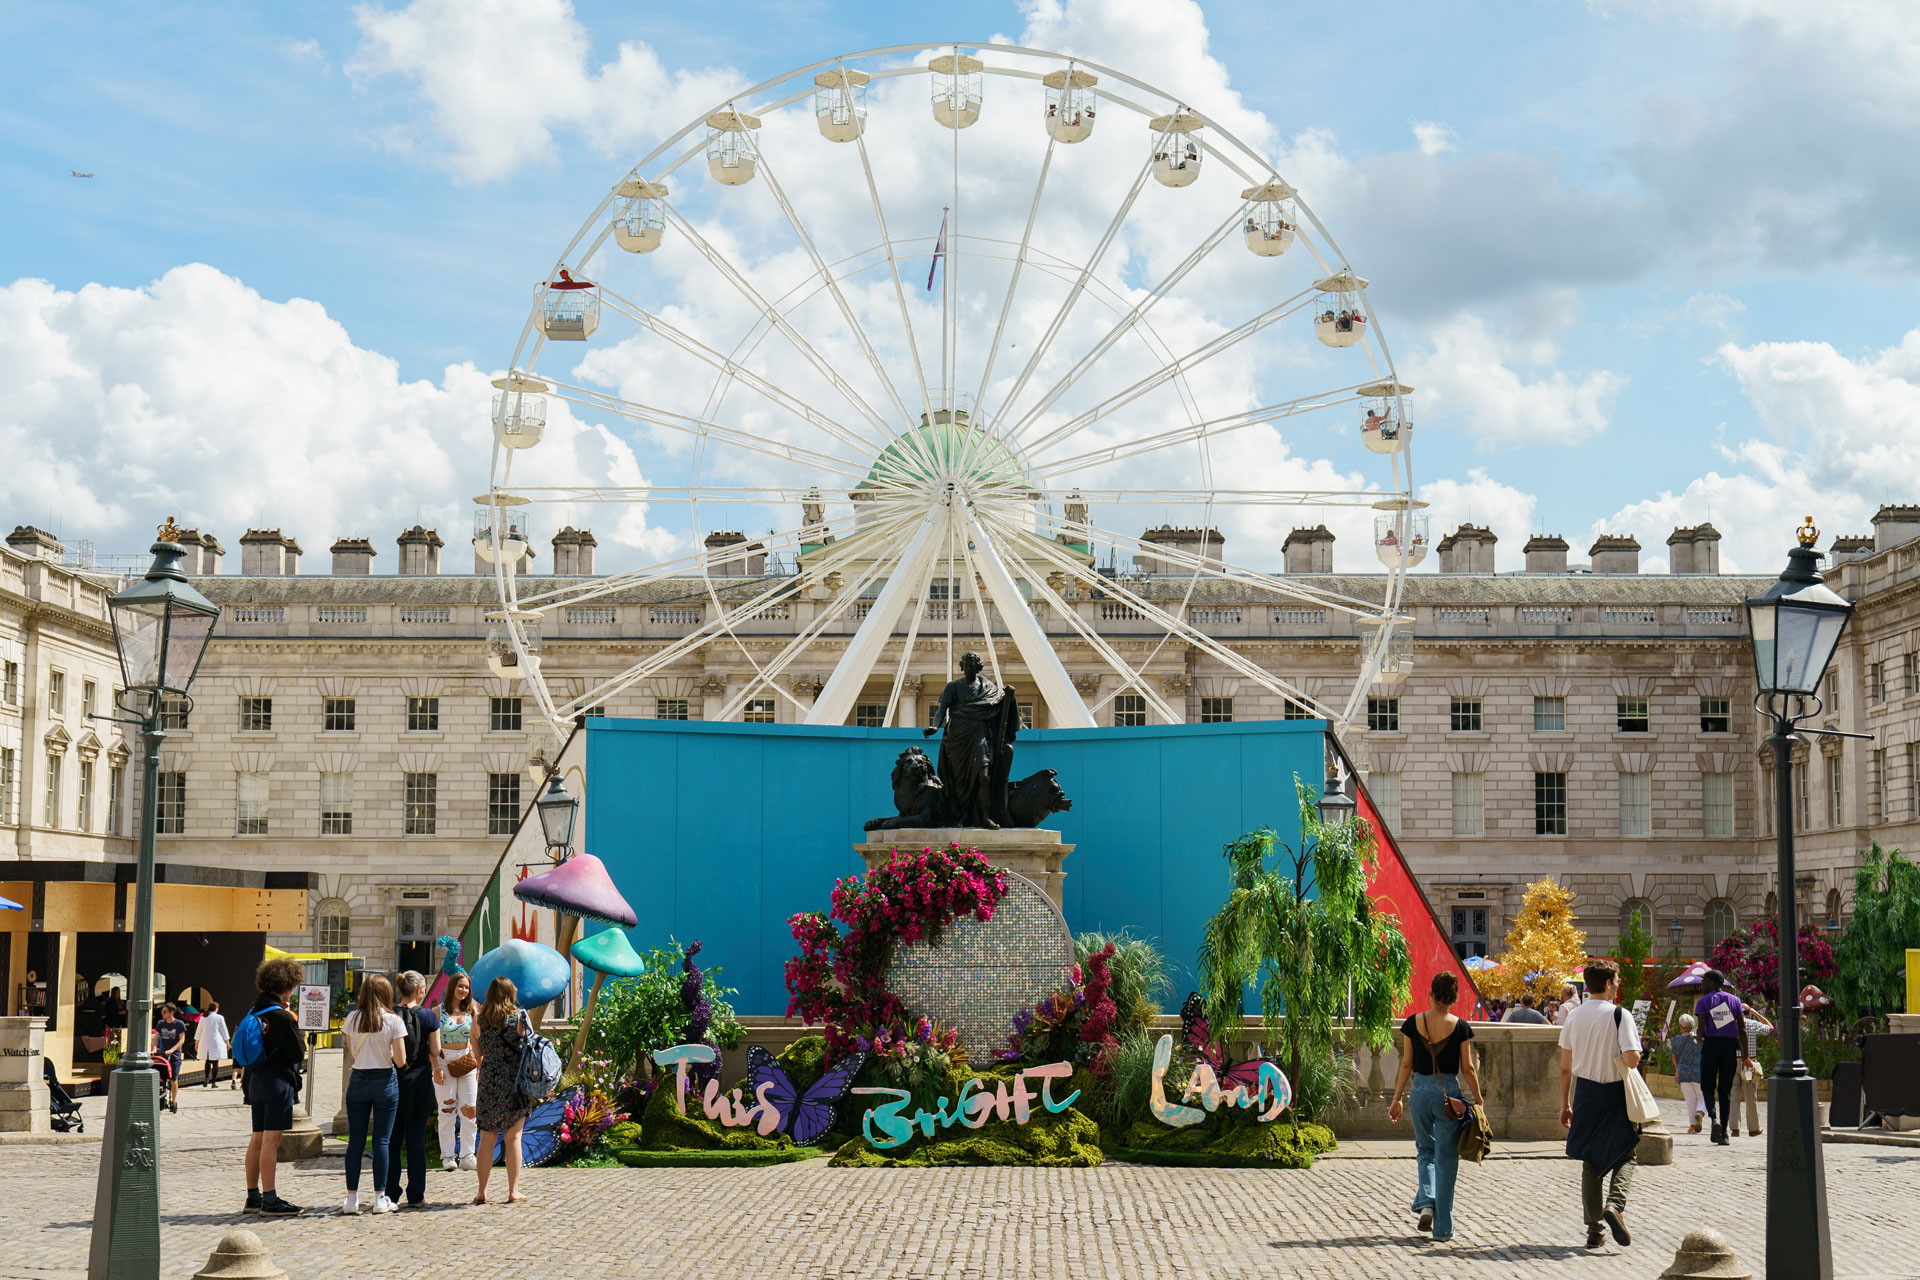 This Bright Land at Somerset House